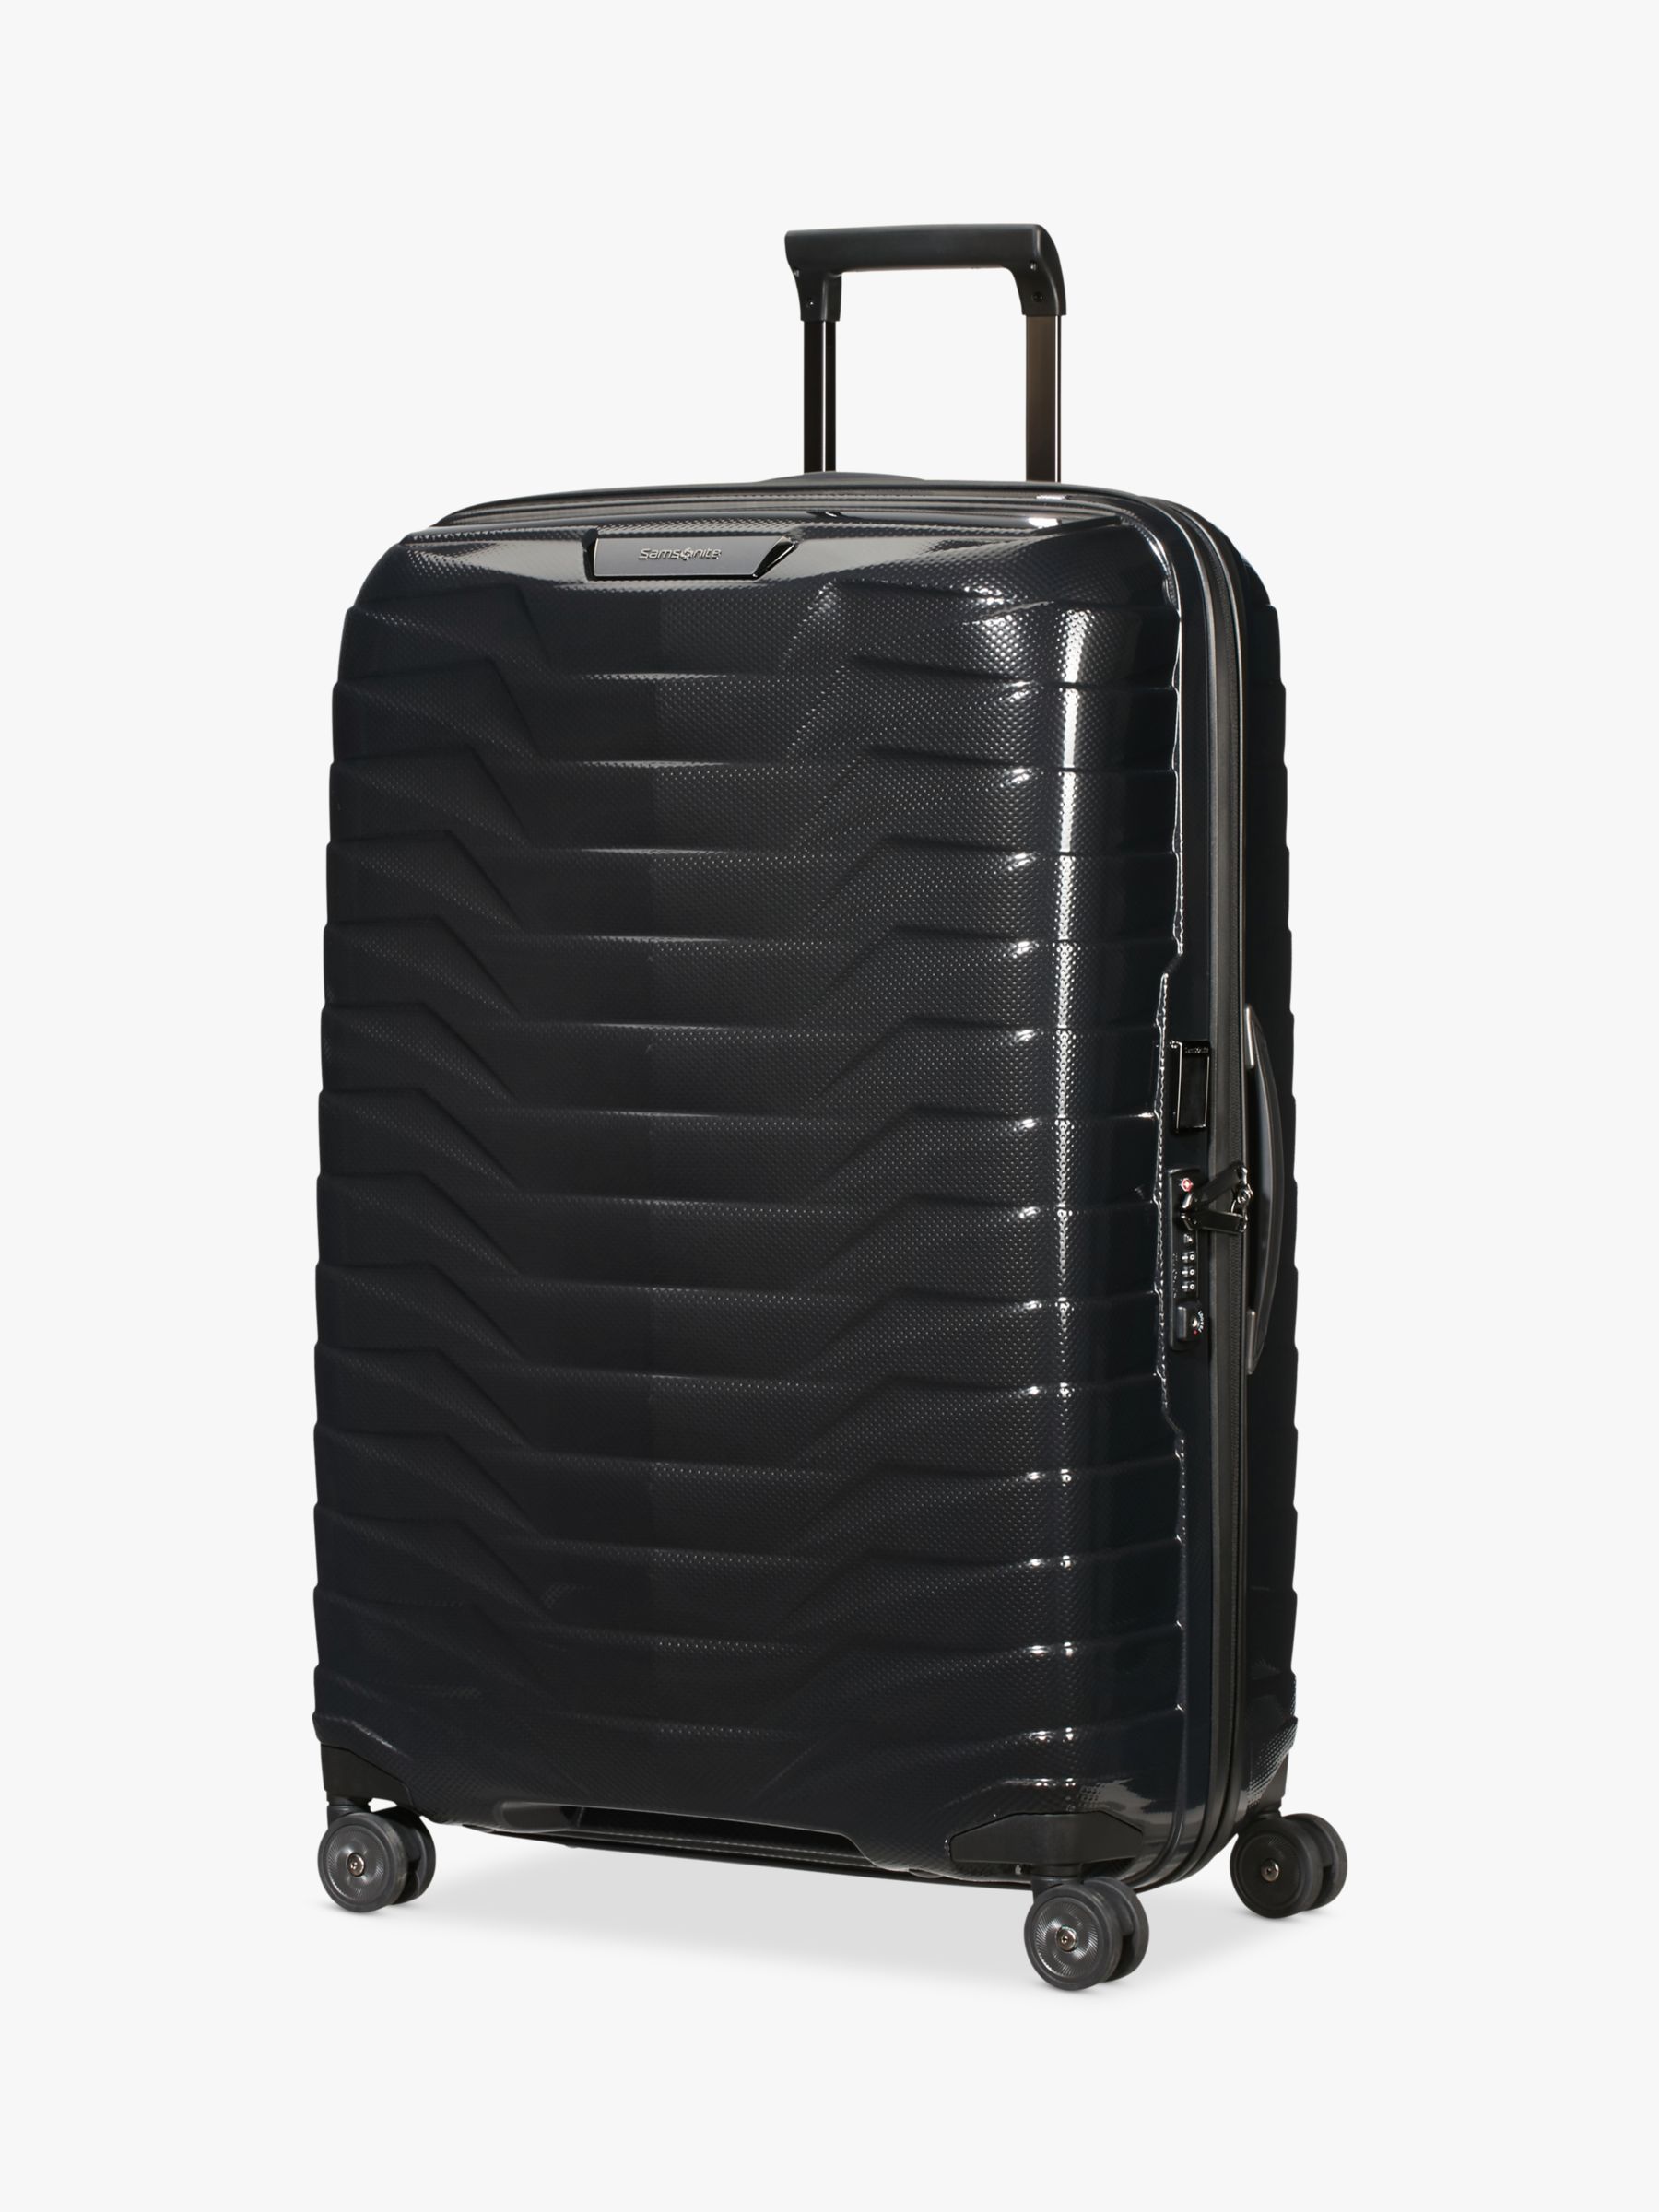 Shop all large suitcases